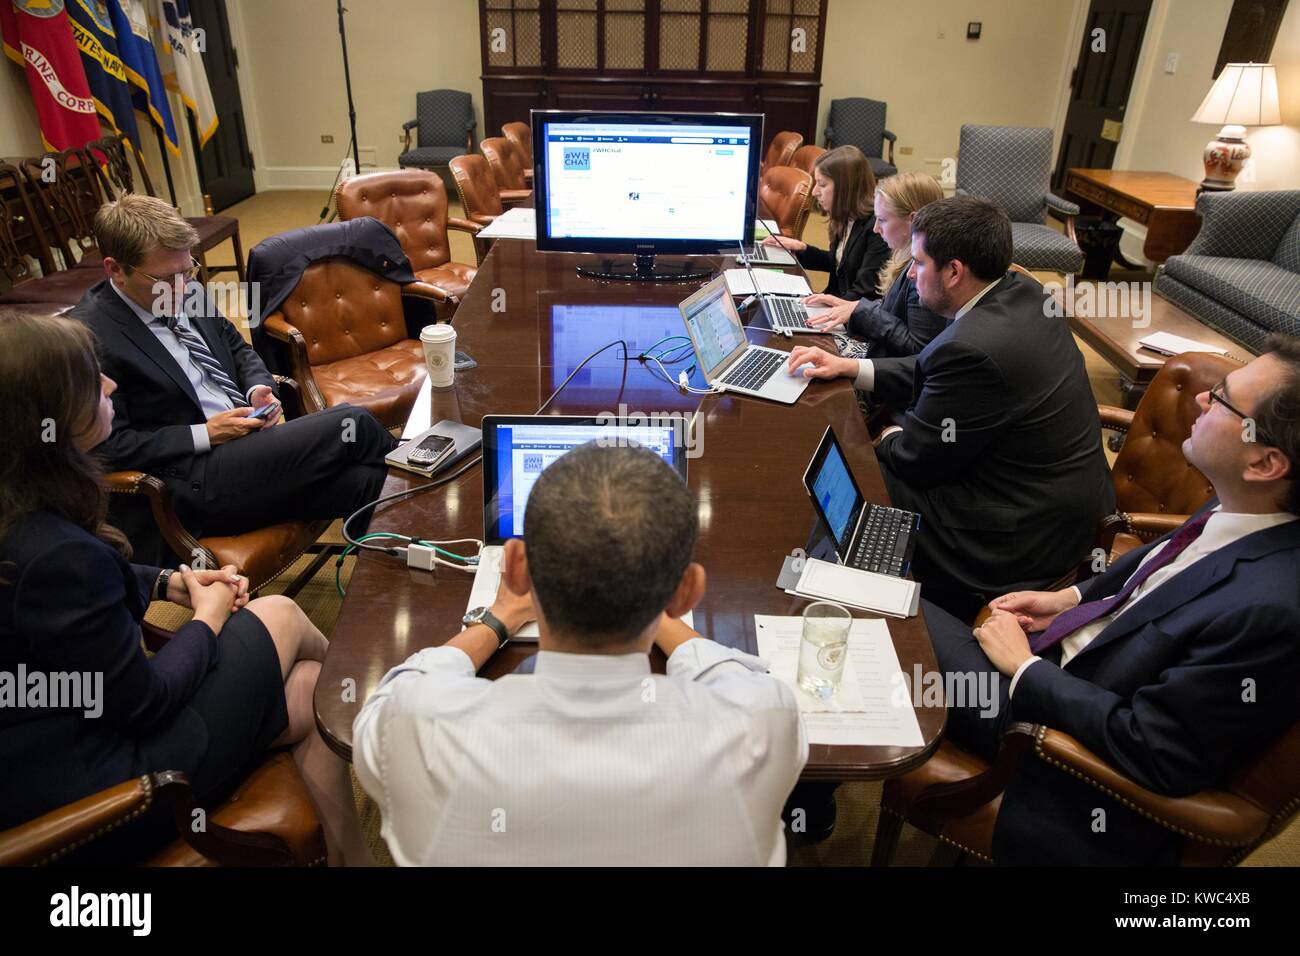 President Barack Obama (center, back to camera) in a live Twitter question and answer session. Roosevelt Room of the White House, Dec. 3, 2012. (BSLOC 2015 13 150) Stock Photo